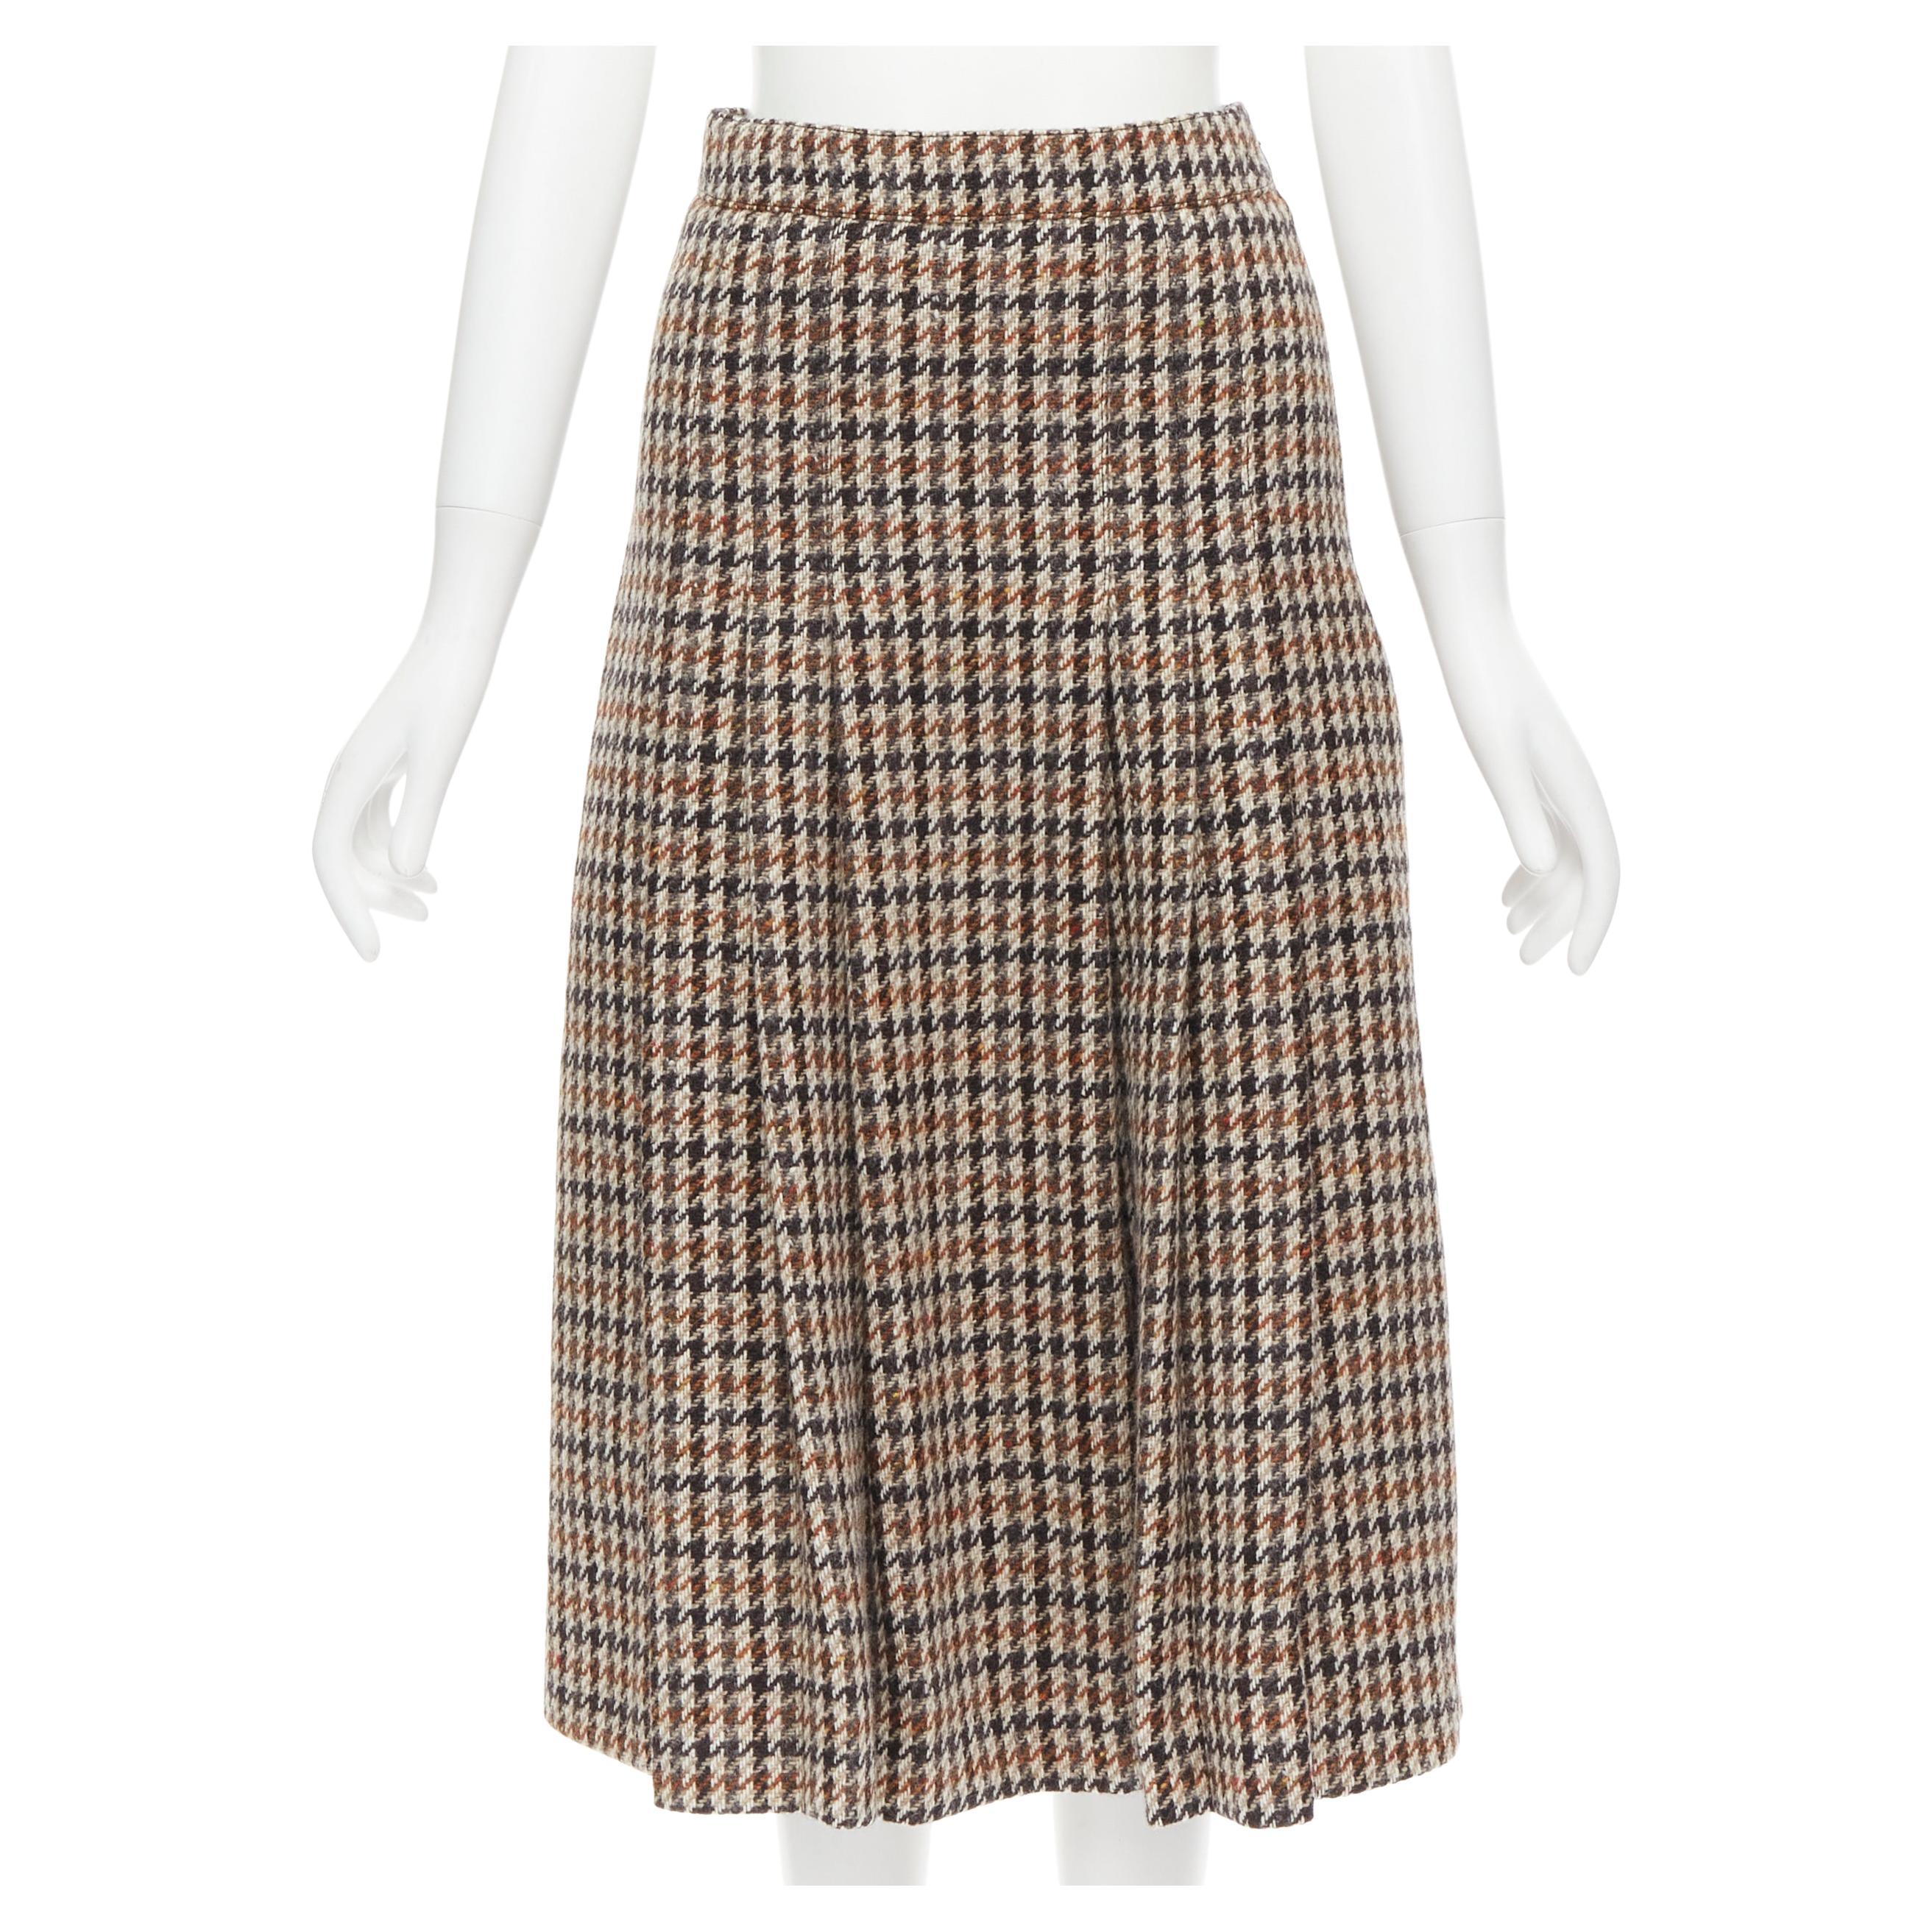 Houndstooth Skirts - 12 For Sale on 1stDibs | houndstooth maxi 